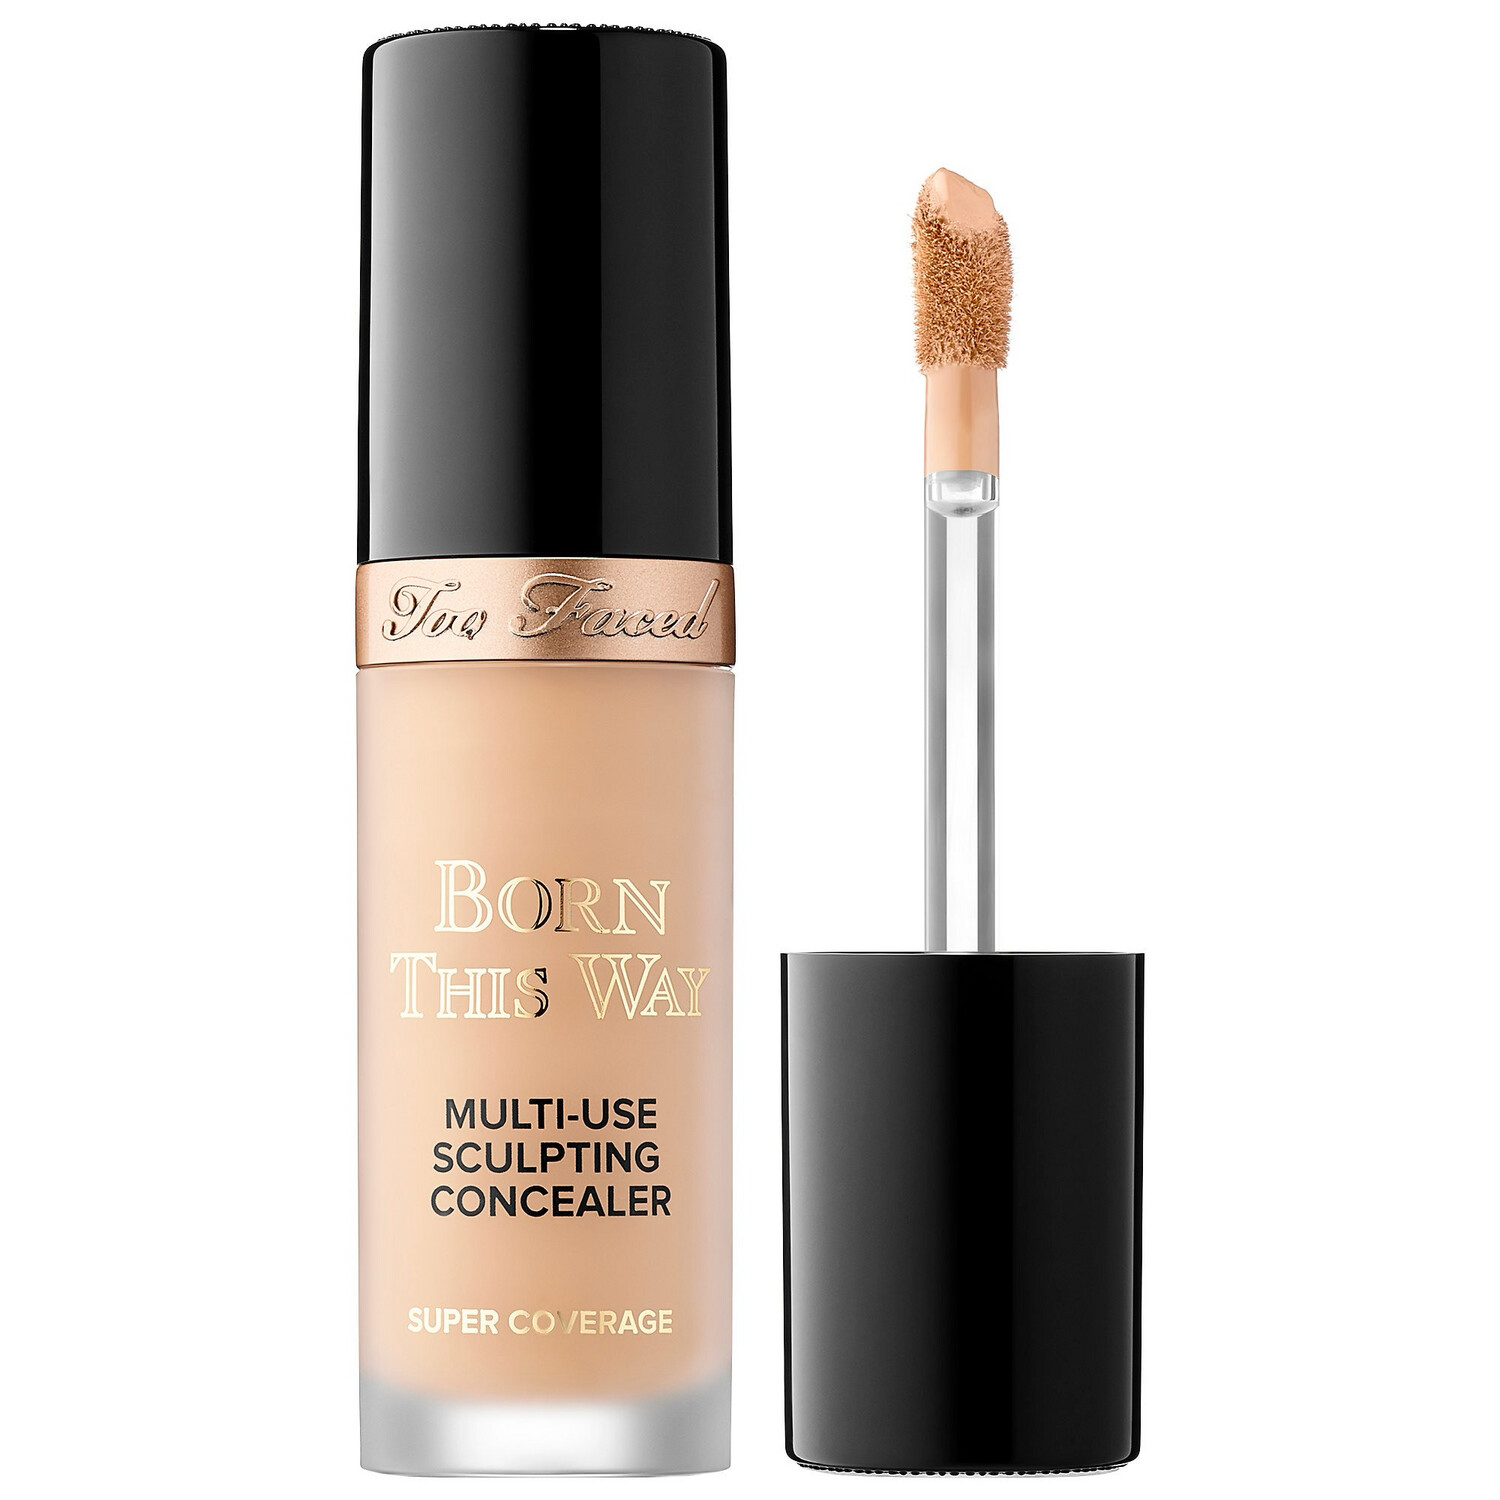 Too Faced - Born This Way Super Coverage Multi-Use Concealer | Nude